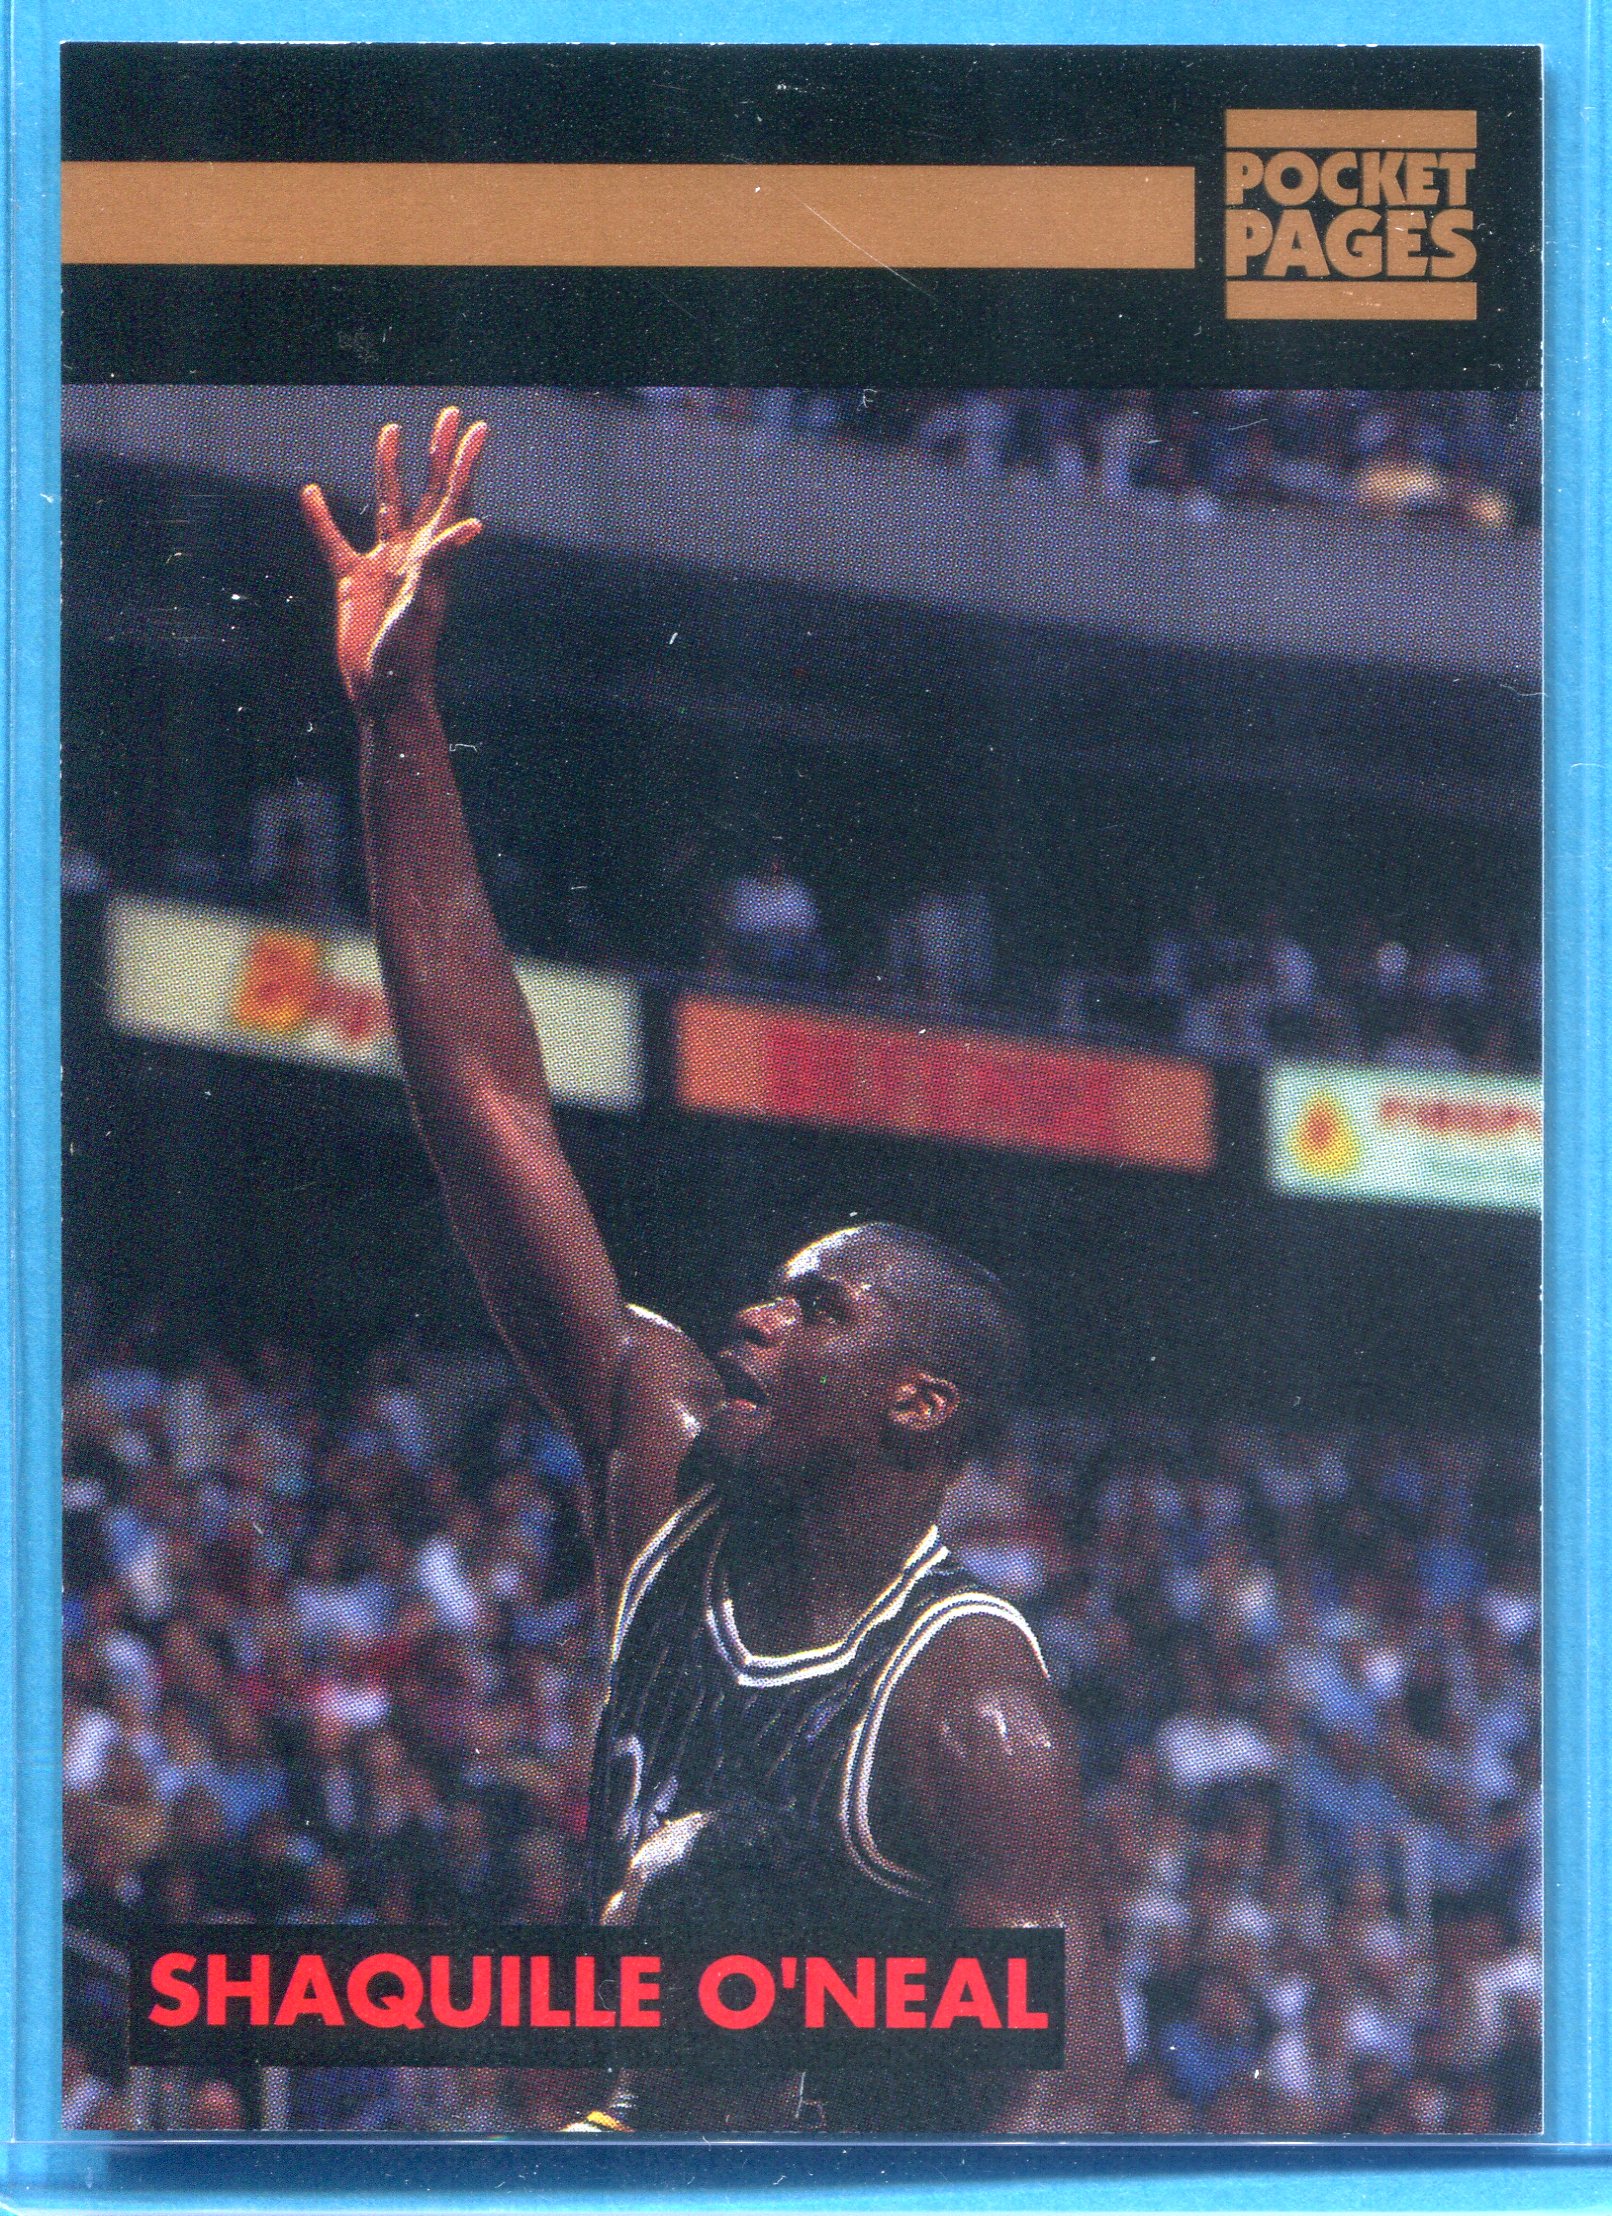 1993 Pocket Pages Trading Card #38 Shaquille O'Neal